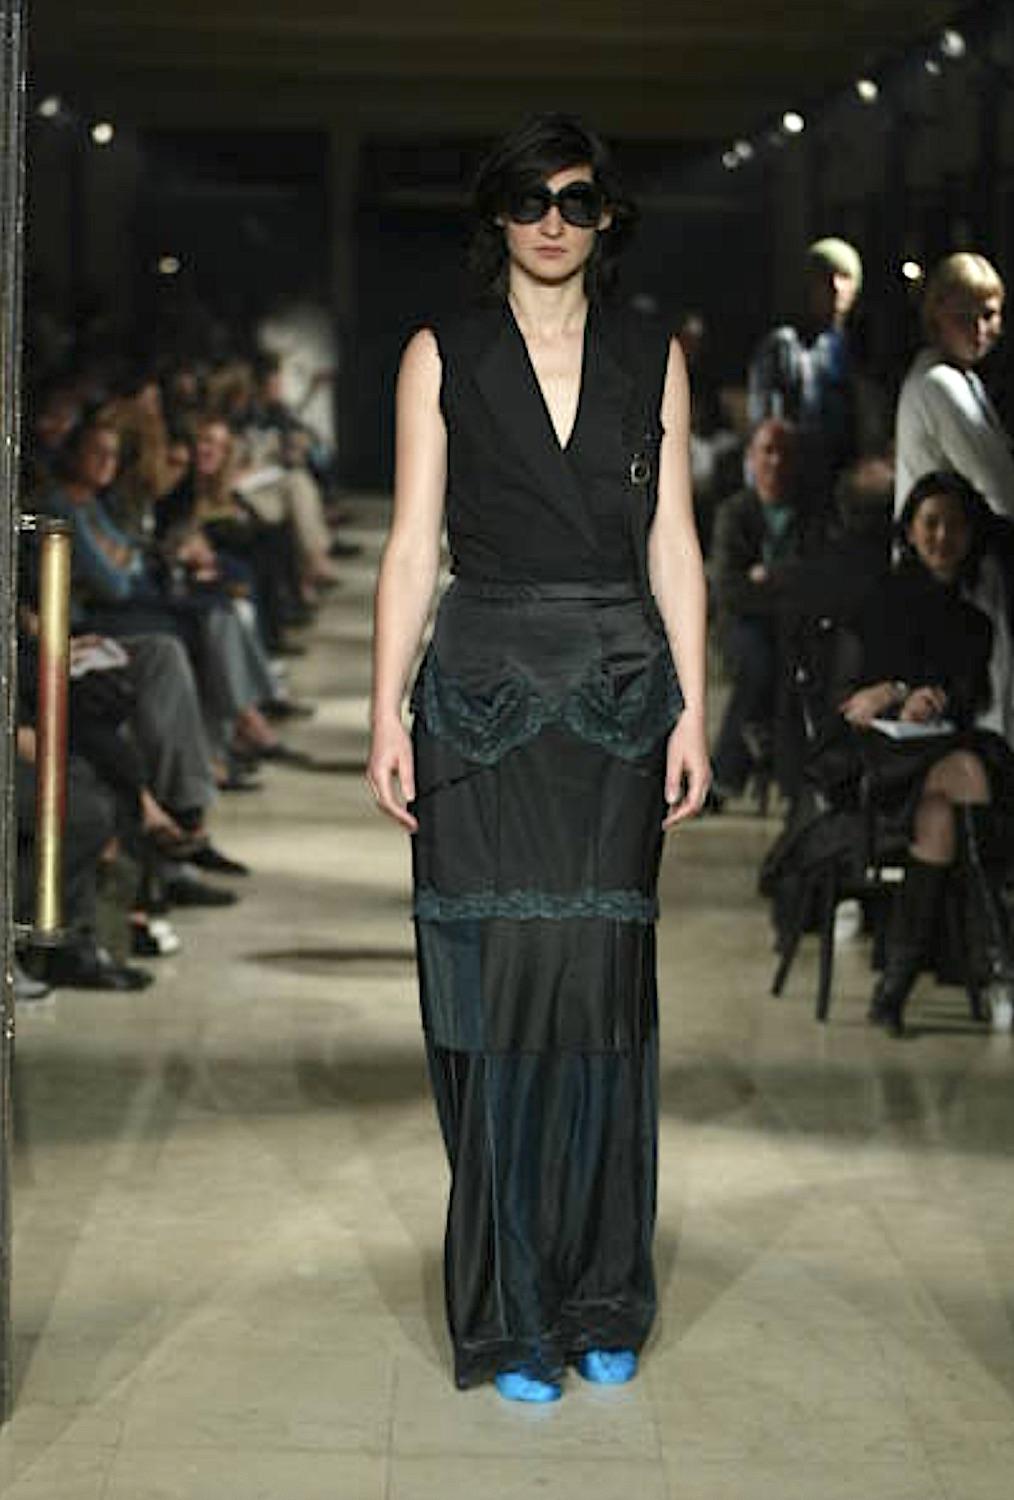 Vintage Martin Margiela artisanal ss 2003 runway black folded dress skirt In Excellent Condition For Sale In Antwerp, BE